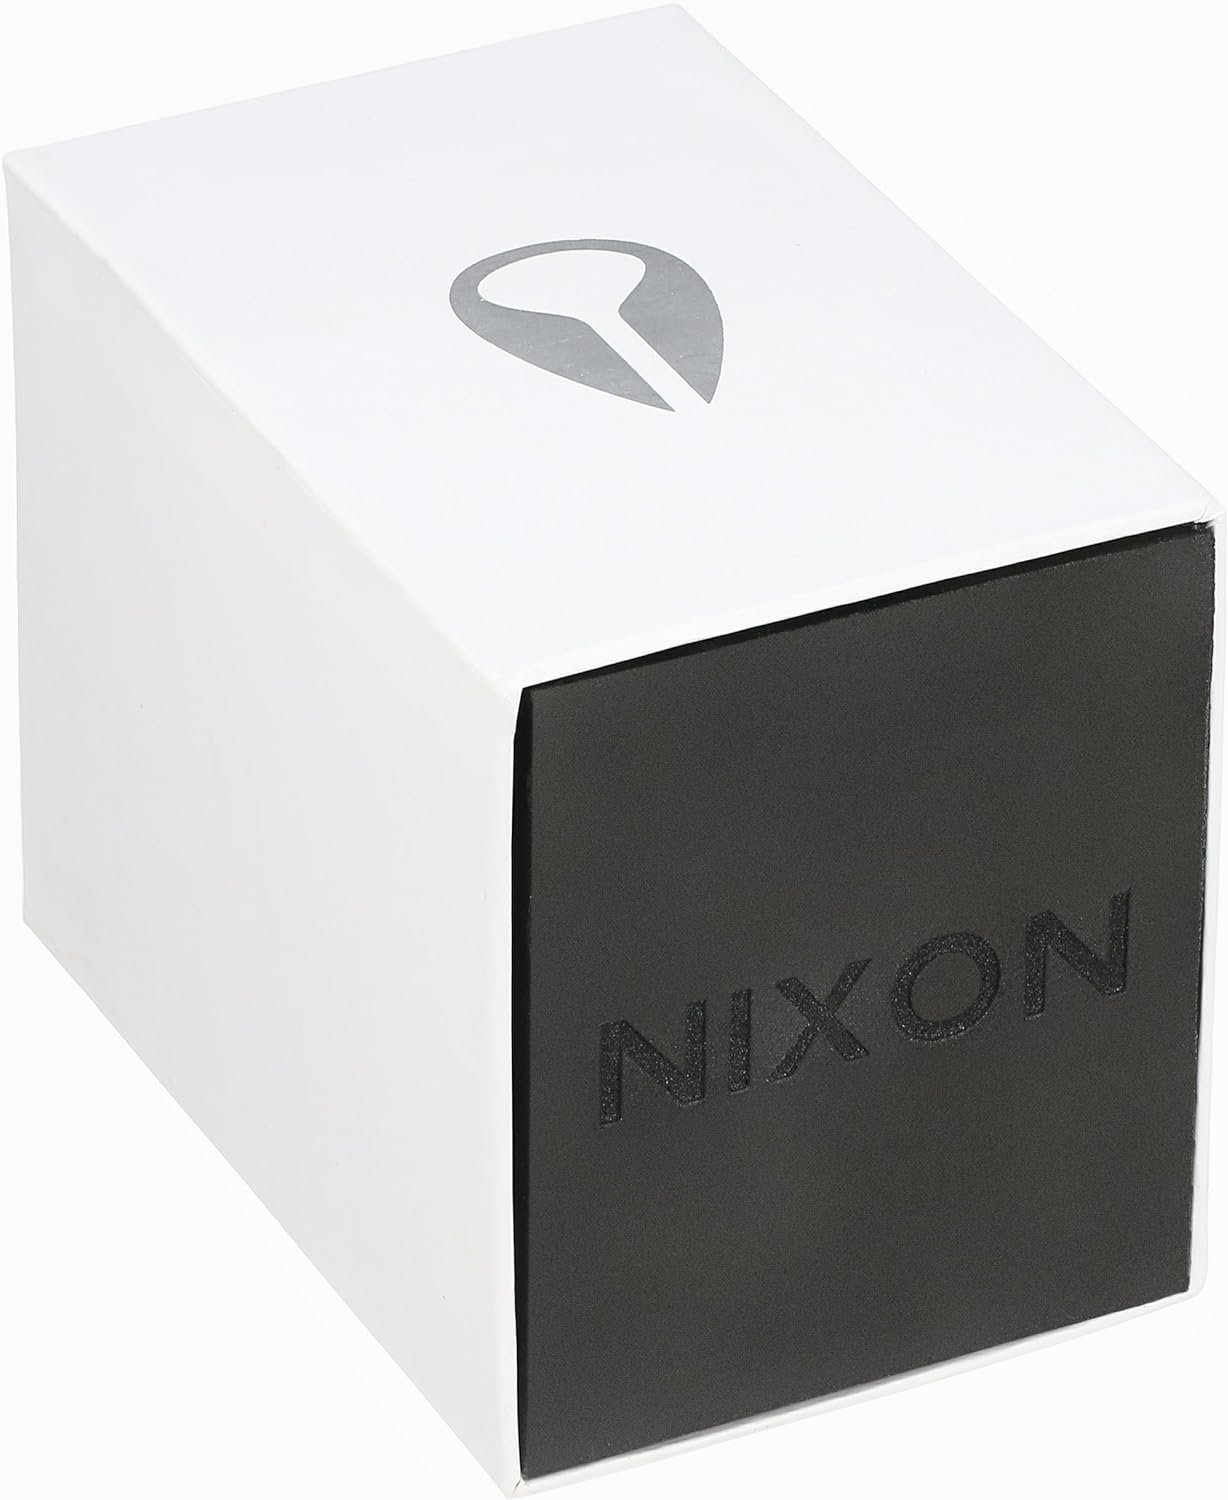 Nixon 51-30 Chrono. 100m Water Resistant Men’s Watch (XL 51mm Watch Face/ 25mm Stainless Steel Band)